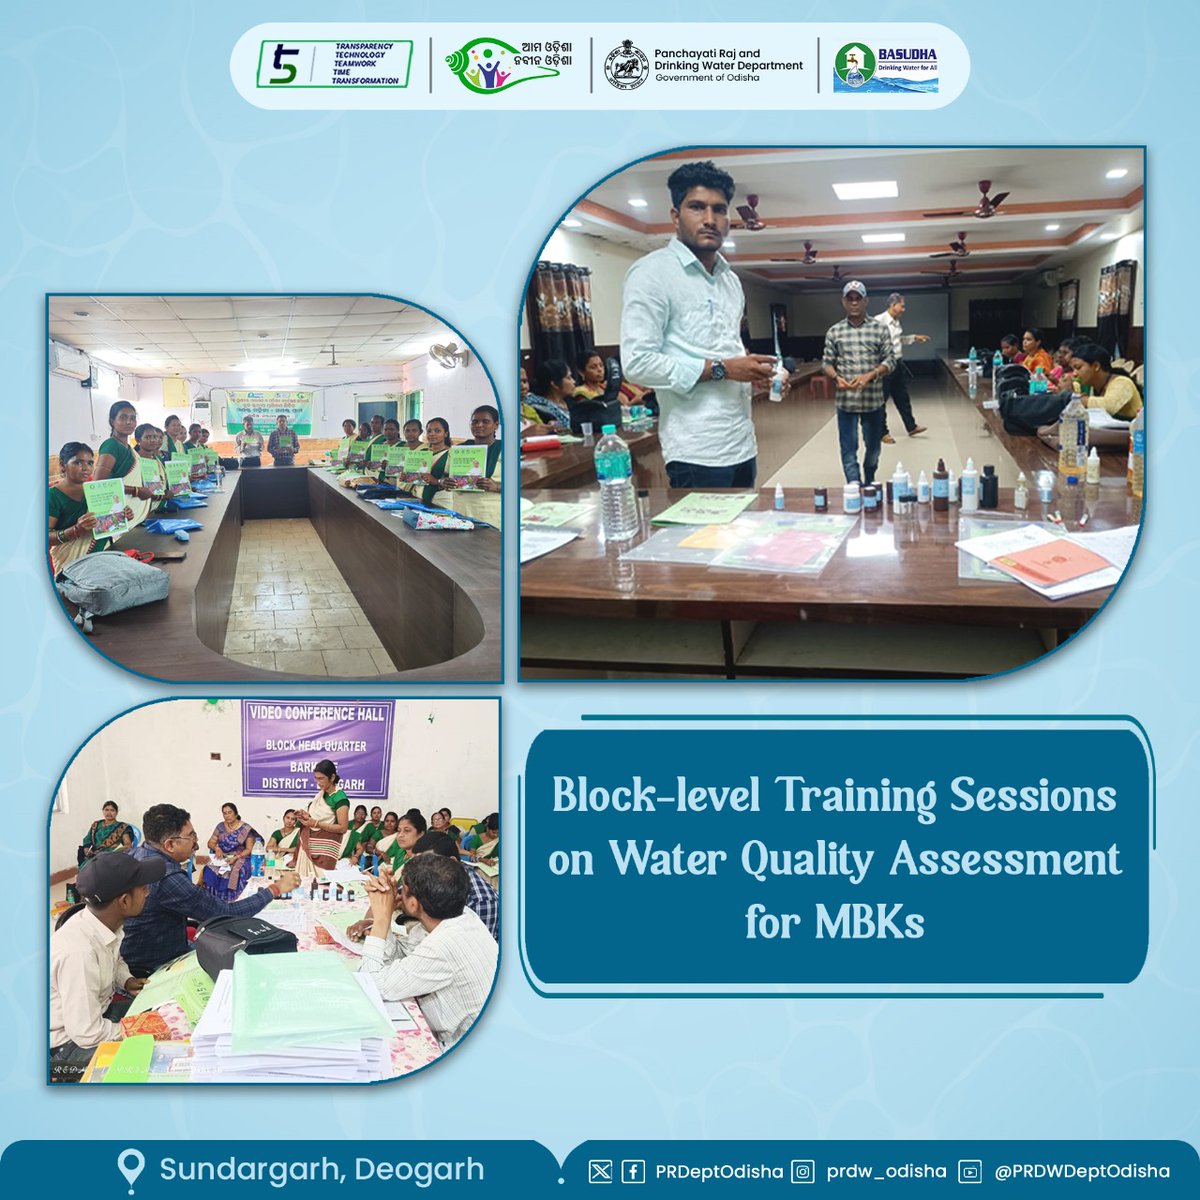 Block-level training sessions for Master Book Keepers on assessing water quality using #FieldTestingKits are underway in various blocks under #Sundargarh & #Deogarh. This interactive training method not only improves their expertise but also promotes community health & awareness.